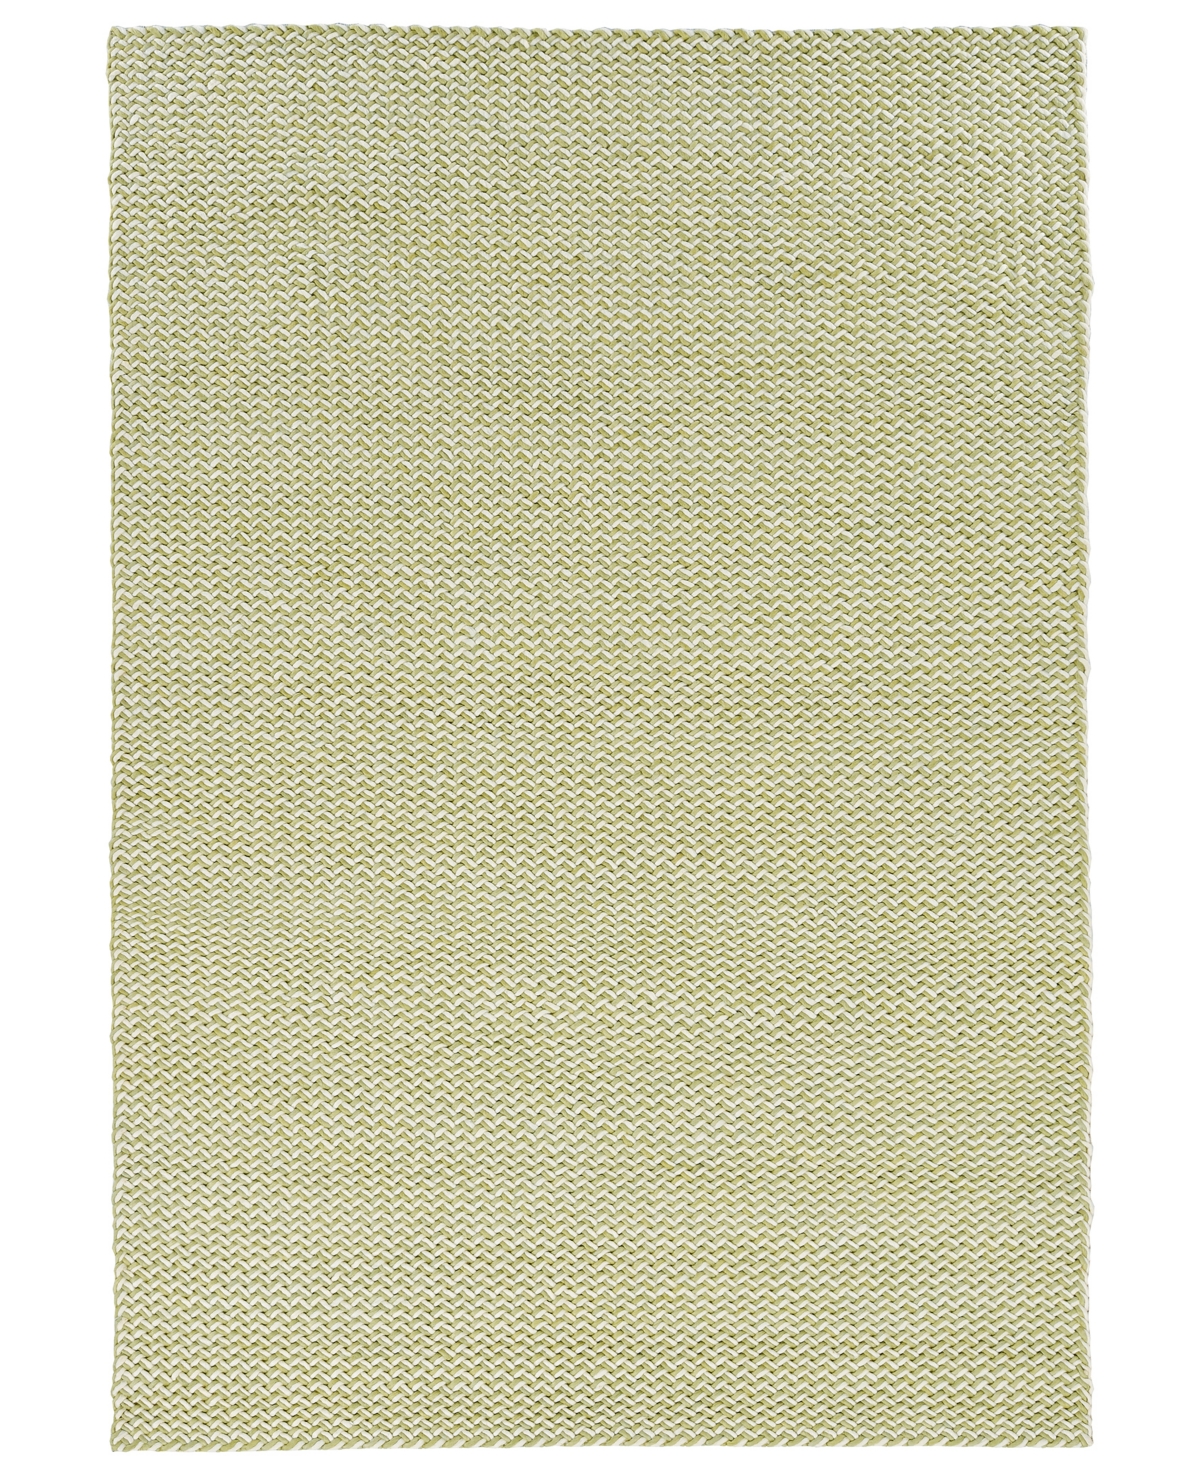 Km Home Bellissima 19 9' X 12' Area Rug In Green